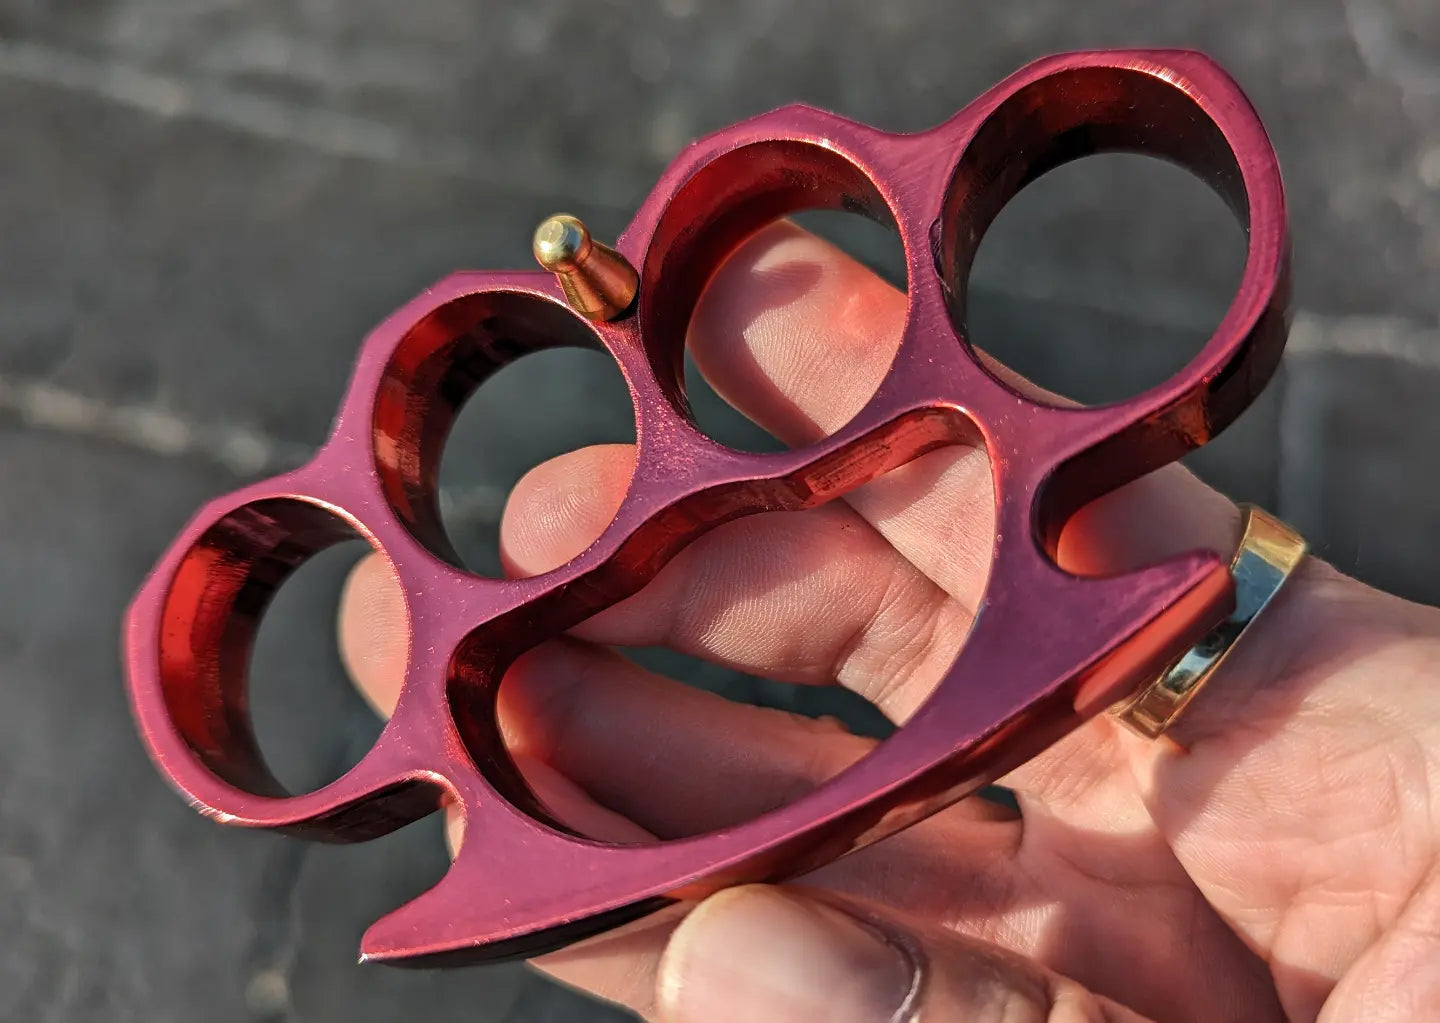 Metallic Red Steel Square Top Knuckle Dusters